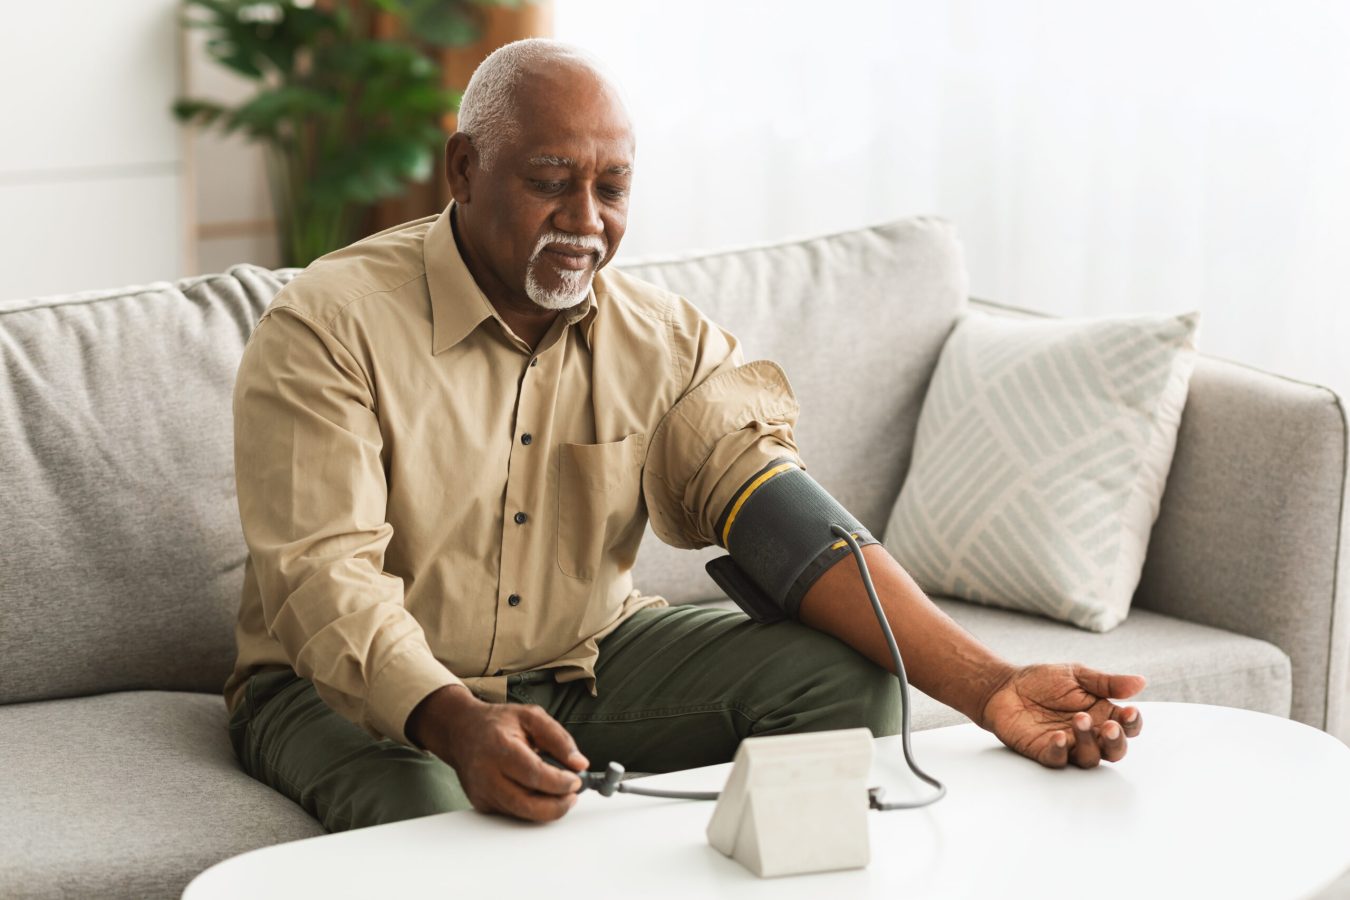 Mature African American Man Measuring Arterial Blood Pressure With Sphygmomanometer Medical Device Sitting On Couch Indoors. High Blood-Pressure, Hypertension Health Problem Concept